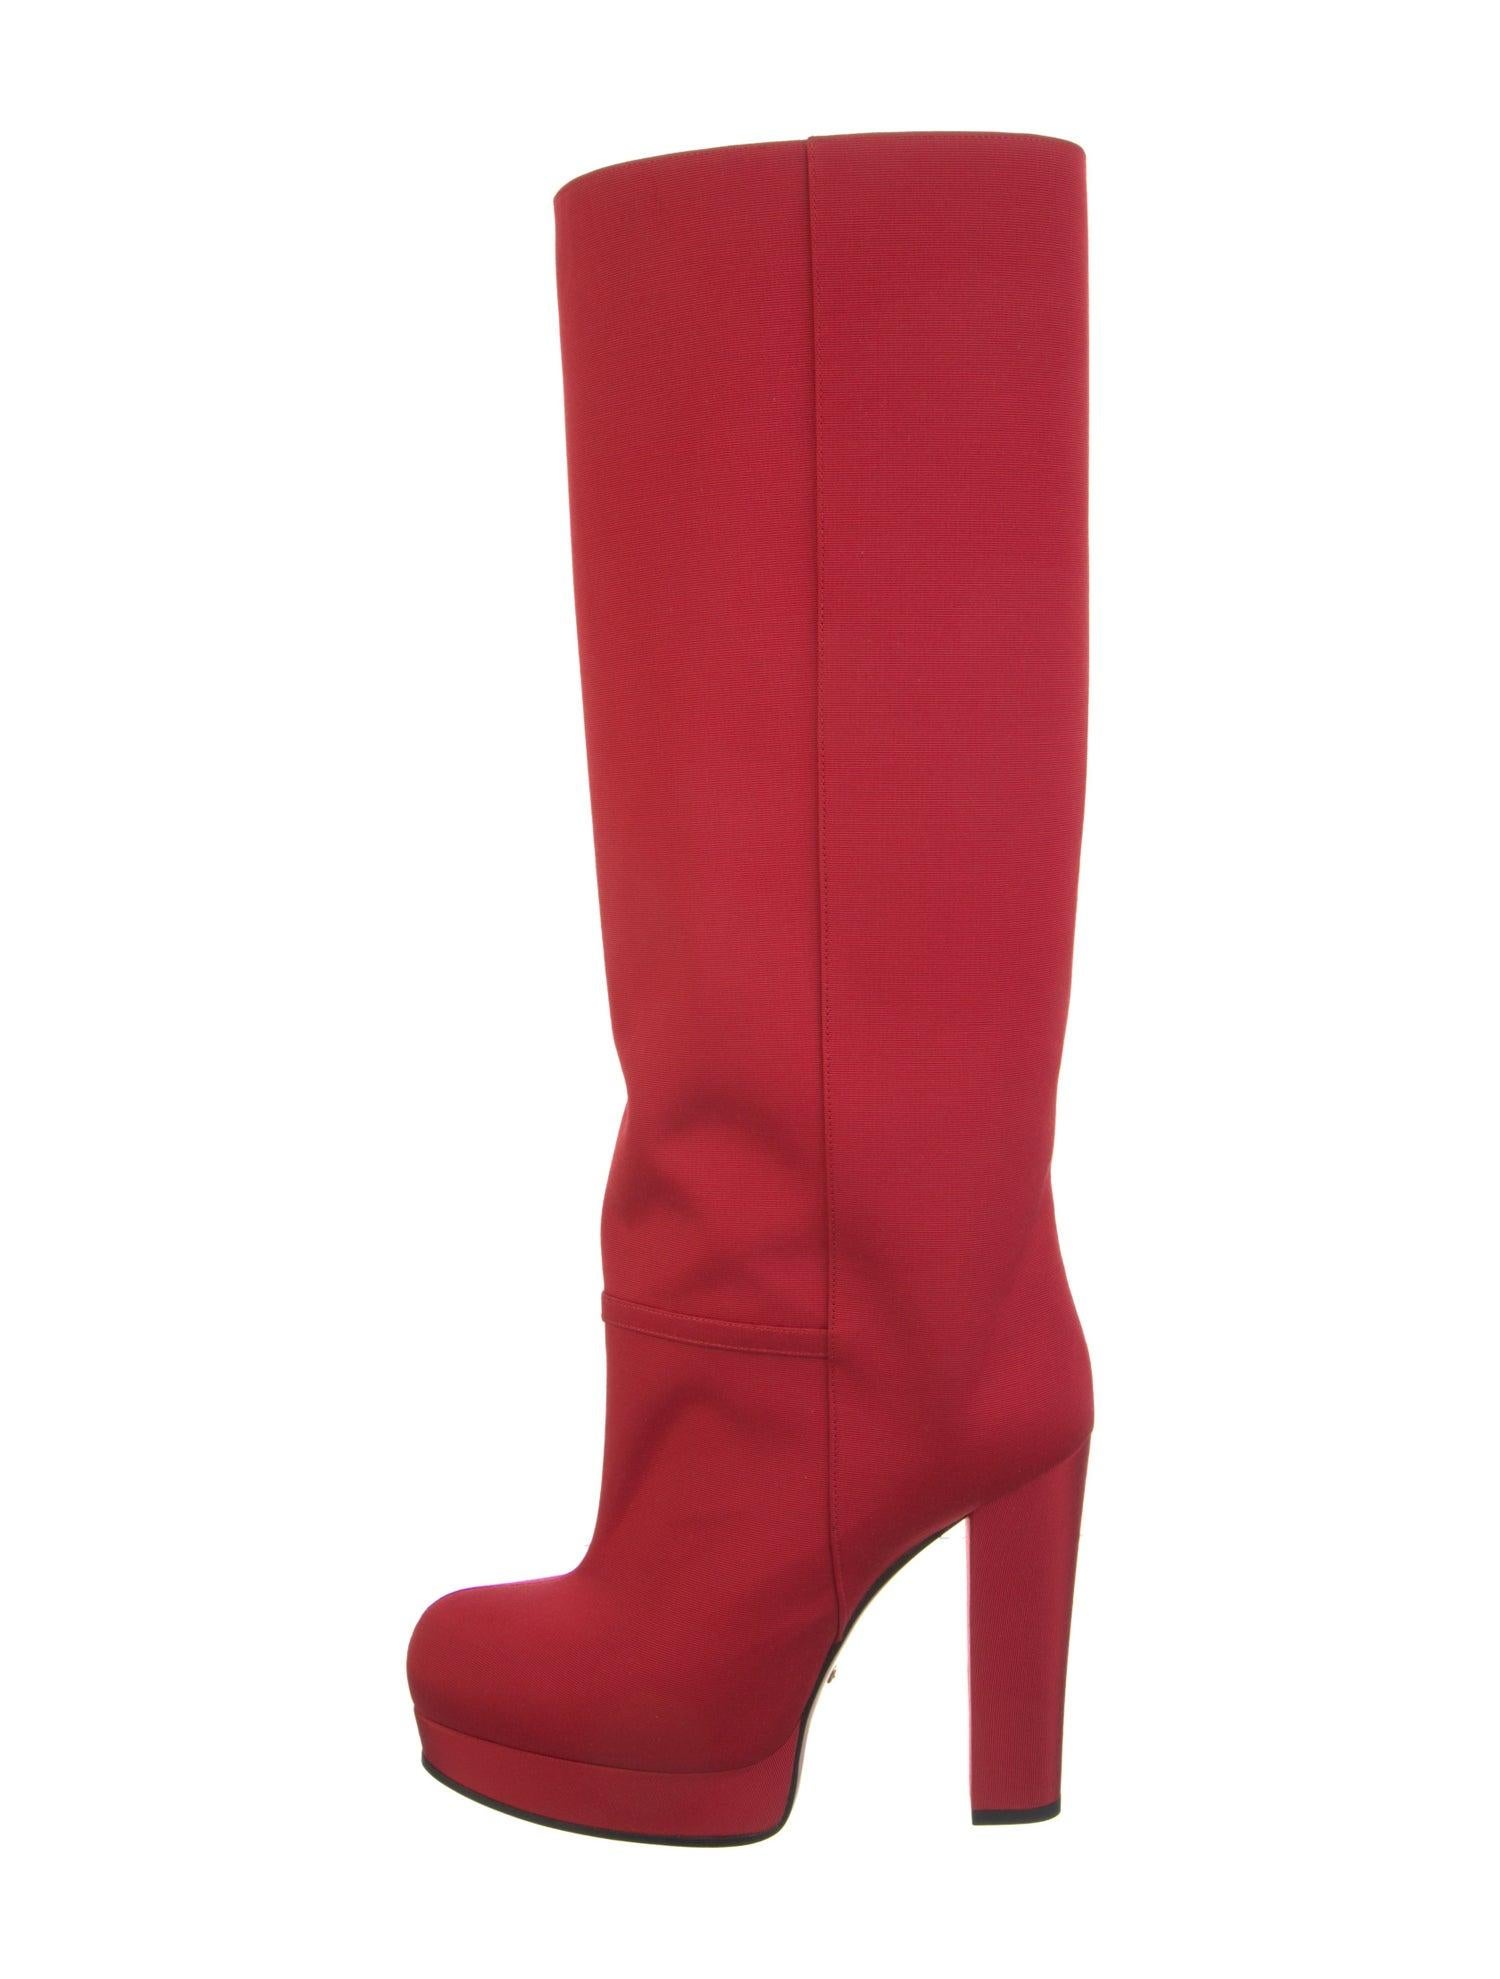 New With Box Gucci Fall 2019 Alessandro Michele Red Boots Sz 38 For Sale 5